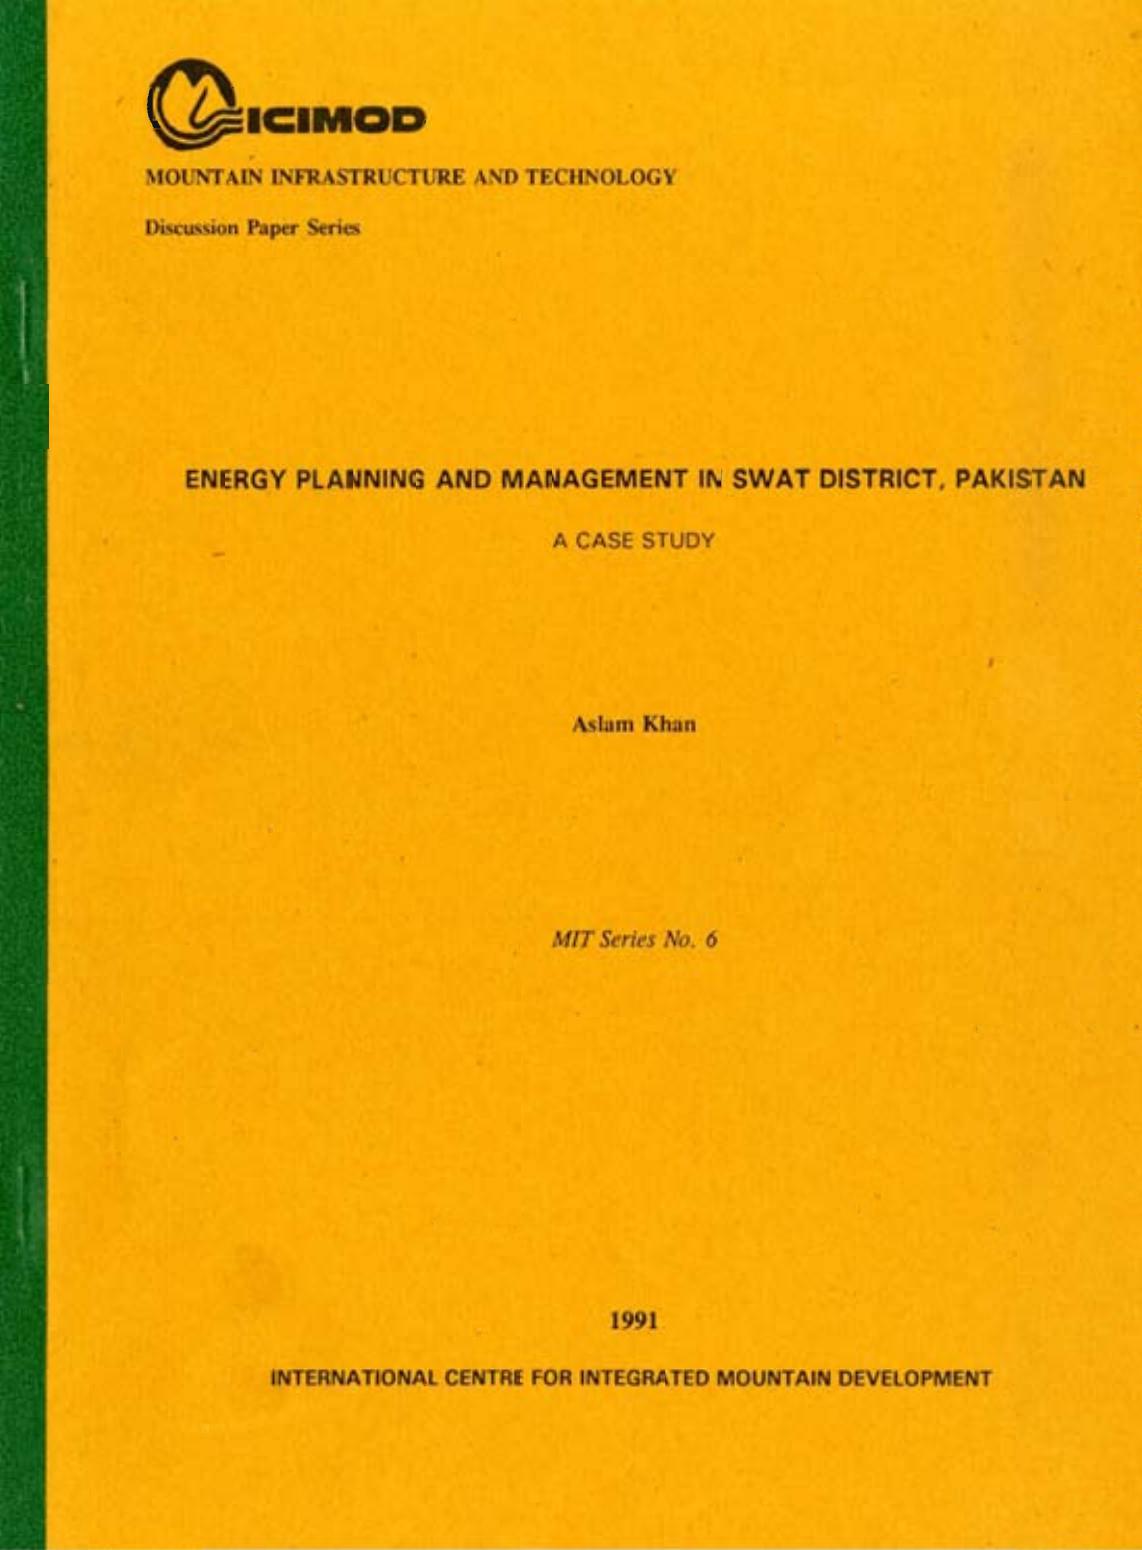 Energy Planning And Management In Swat District, Pakistan; A Case Study